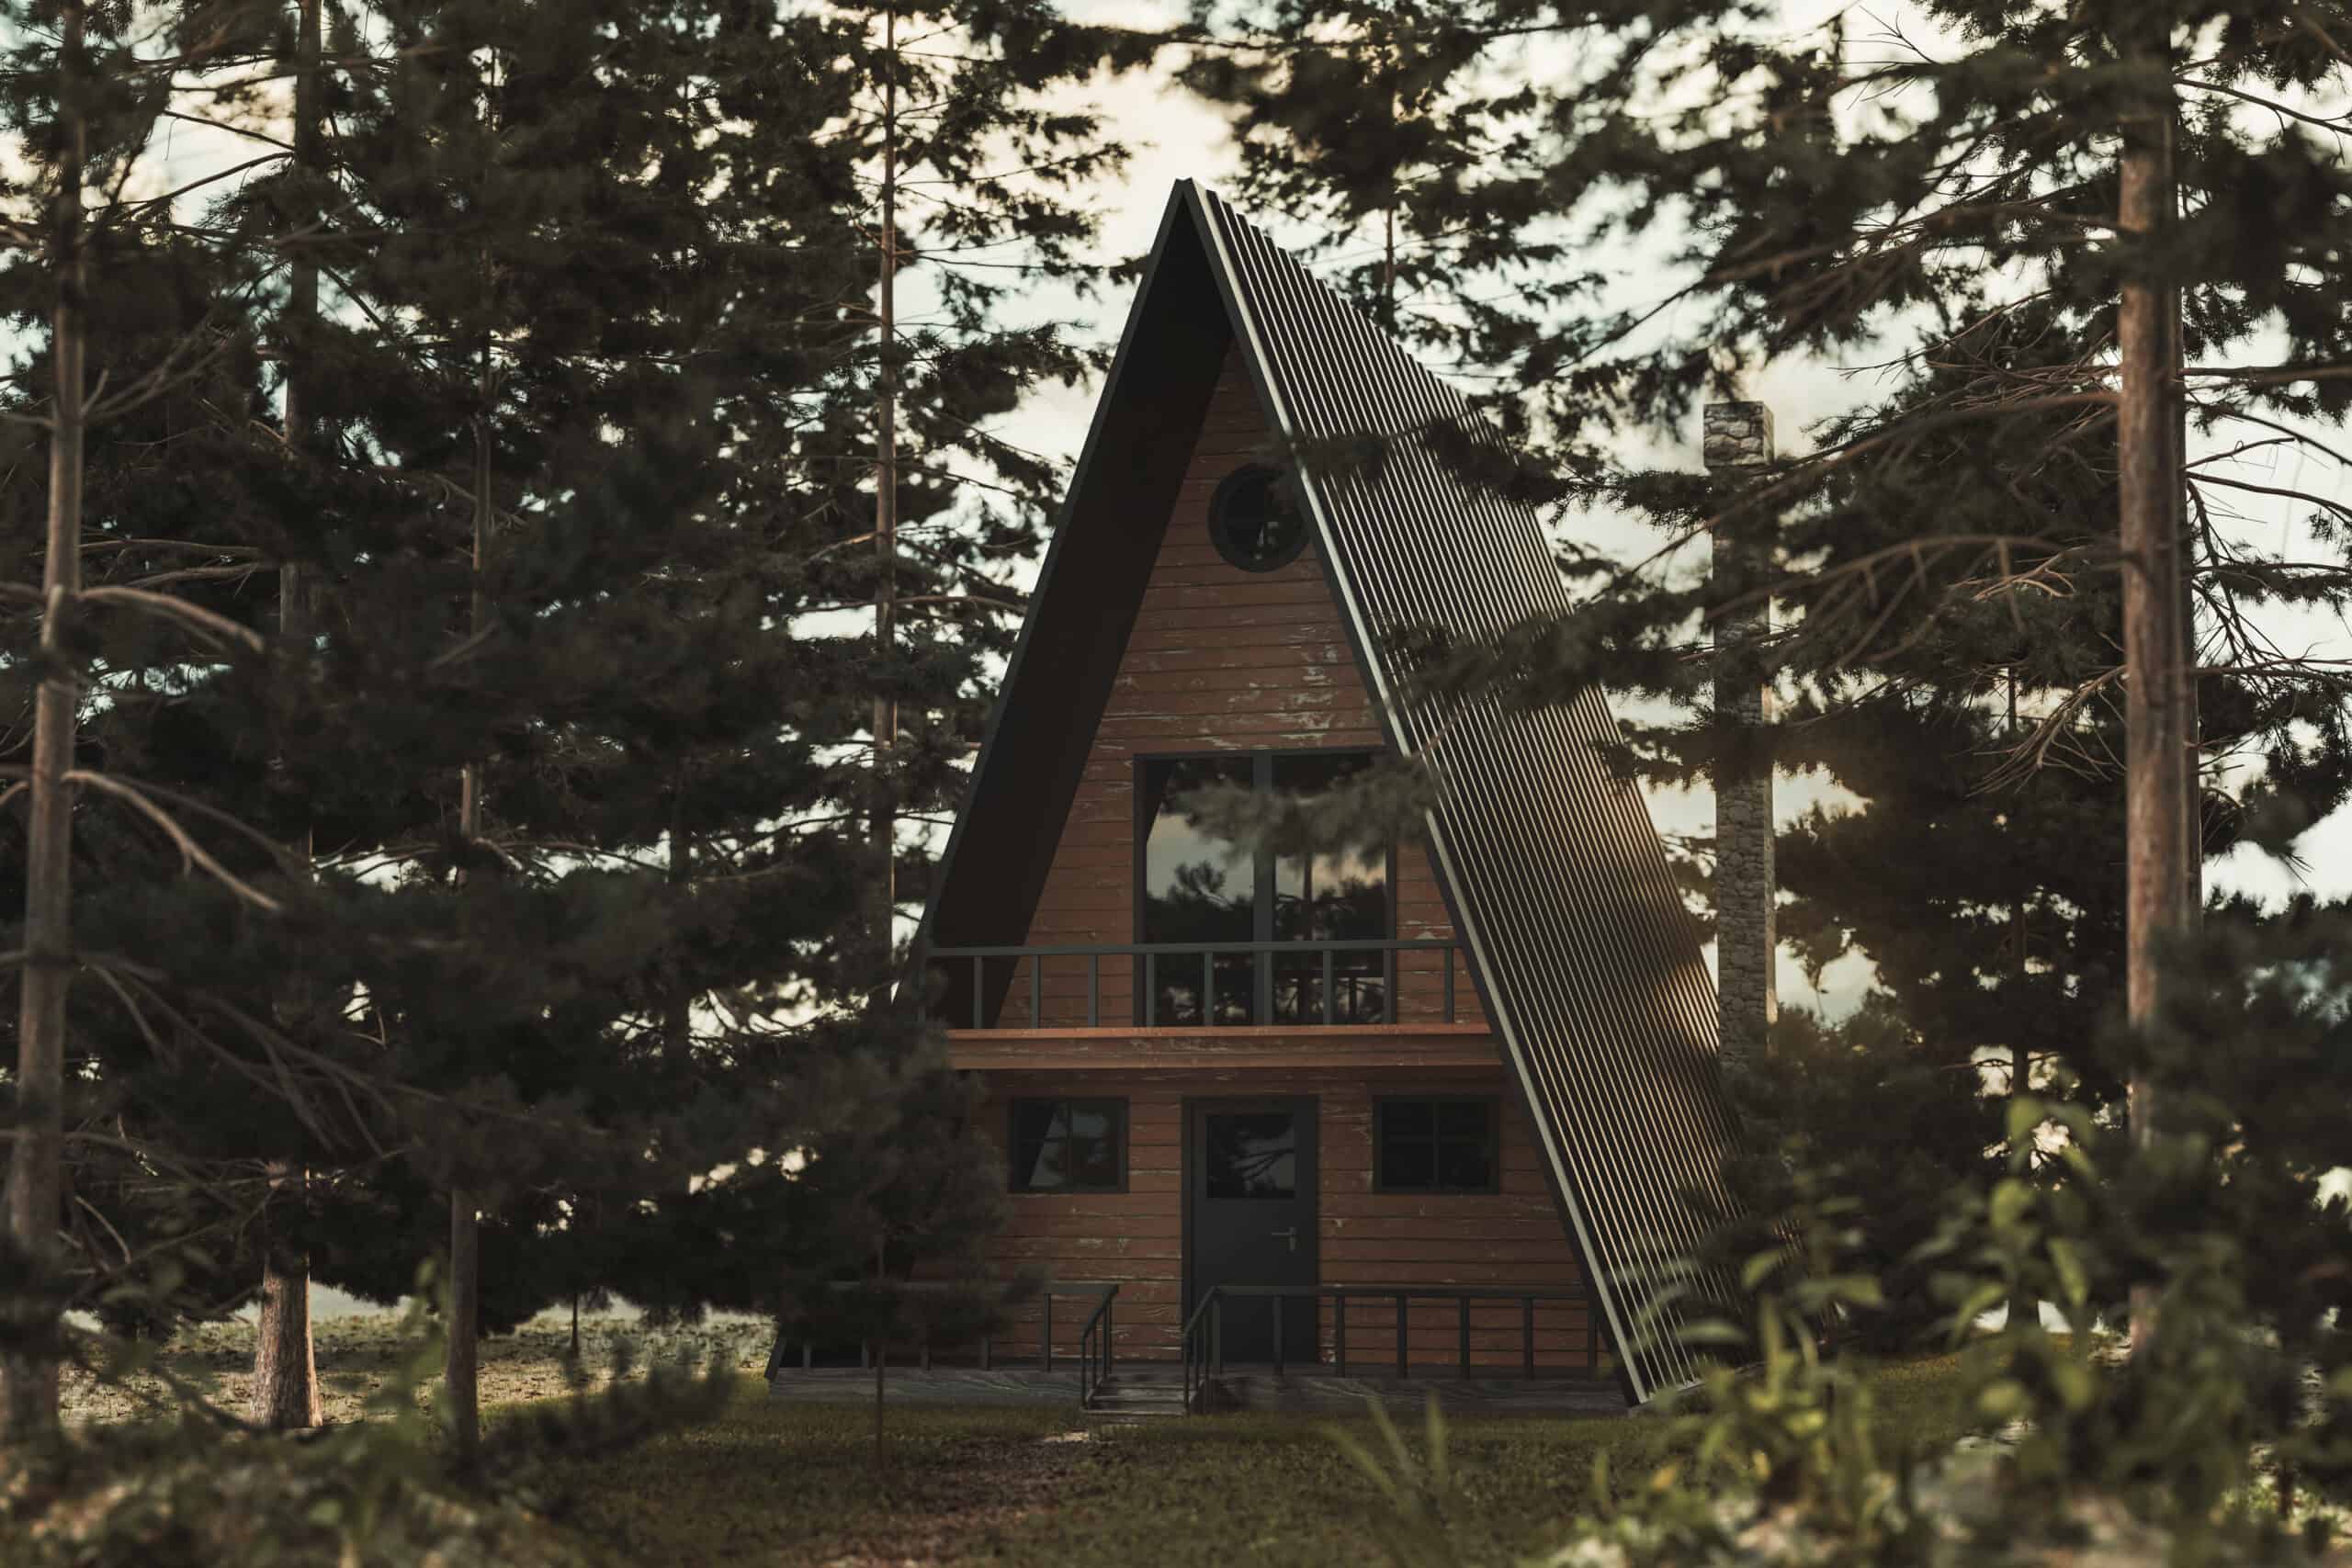 3d rendering of A-frame wooden cabin in forest of pine trees